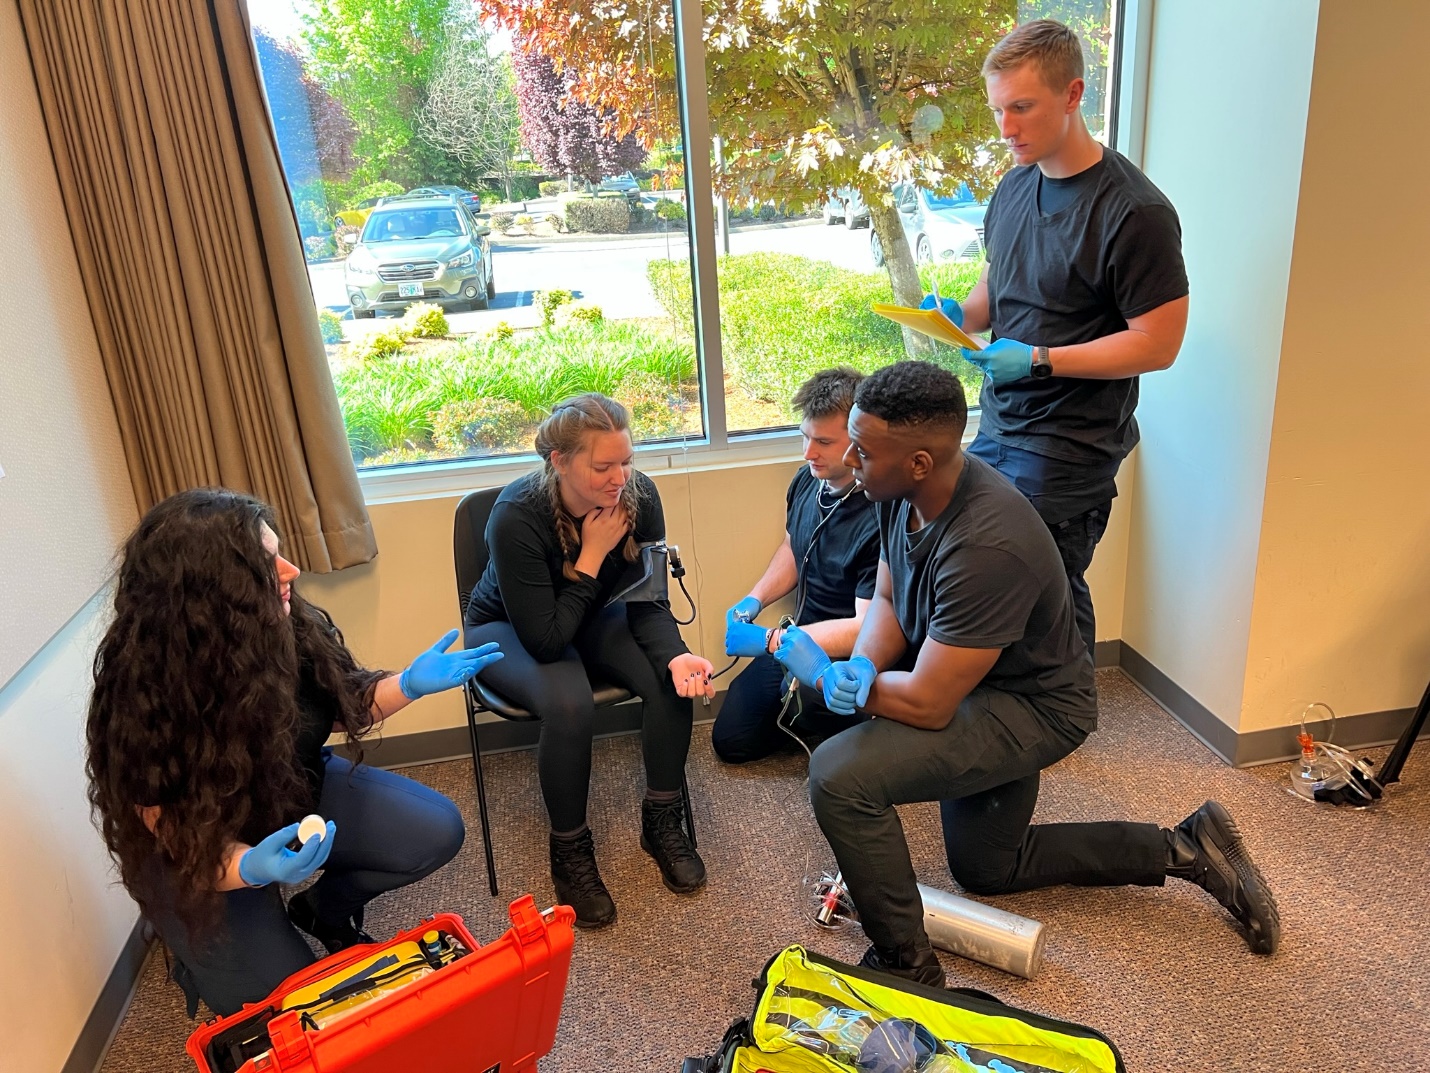 A group of 4 EMS providers, knelt down around patient that is seated in chair. One of the providers appears to be asking question with uplifted hand and slight should shrug while looking at another responder.